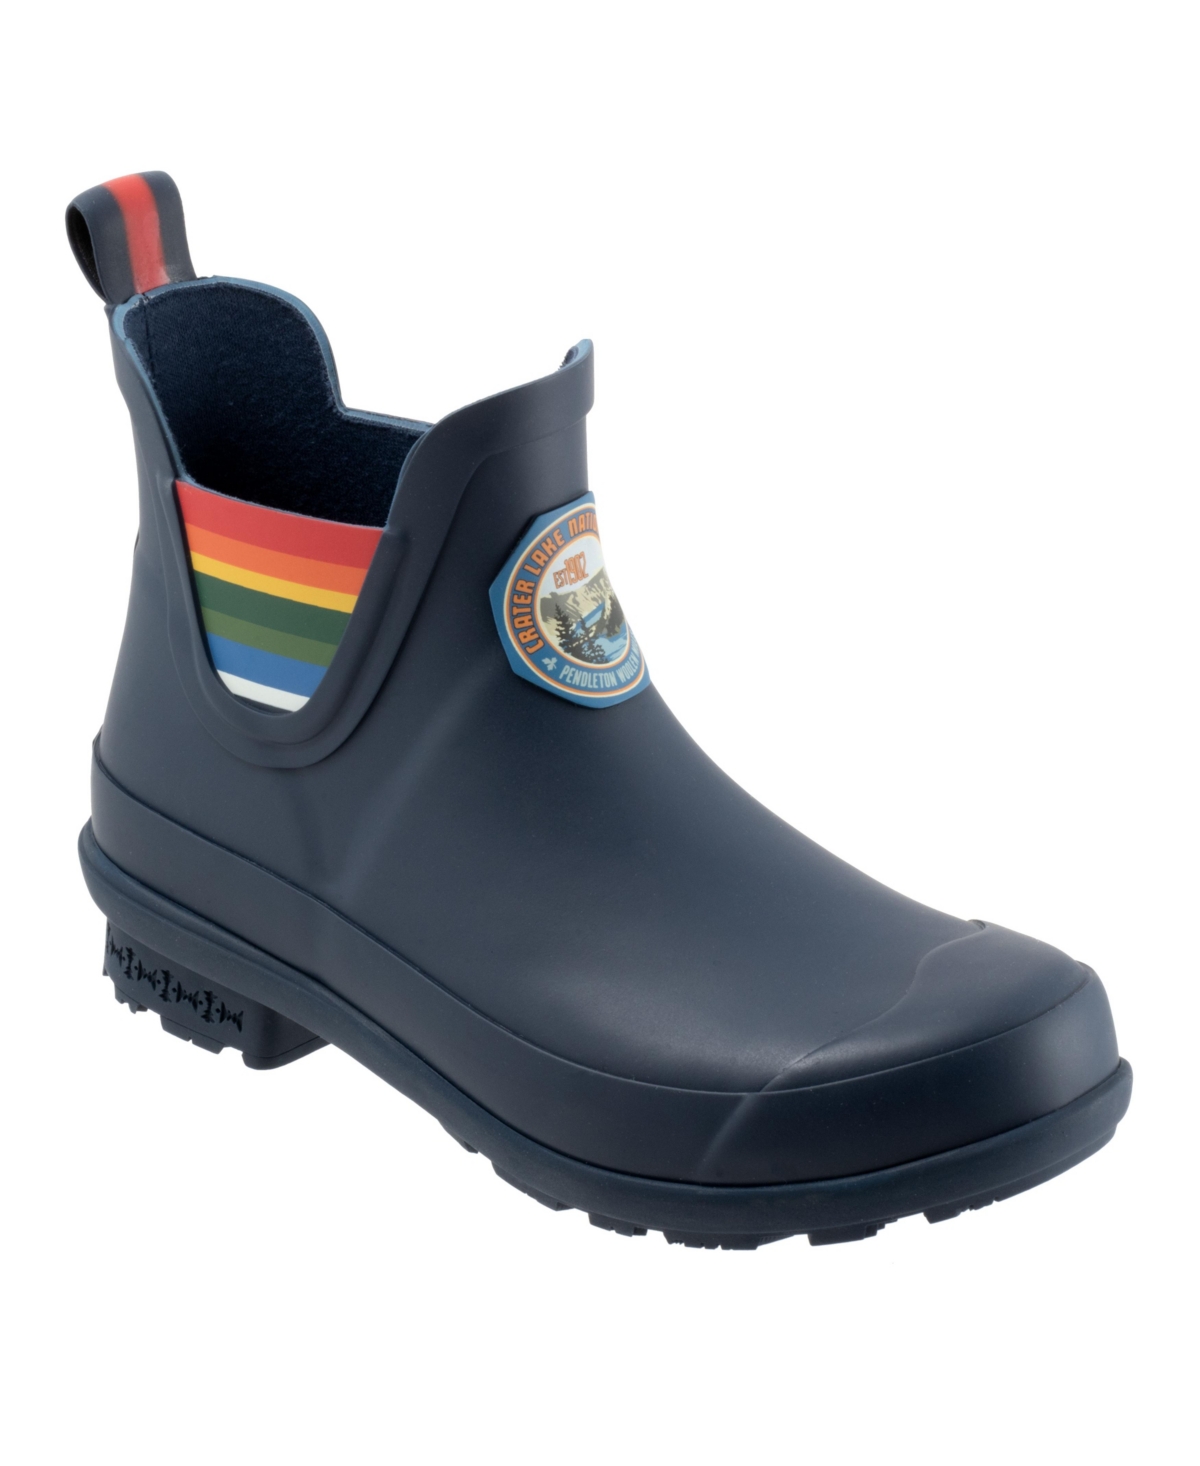 Women's Crater Lake National Park Chelsea Boots - Navy